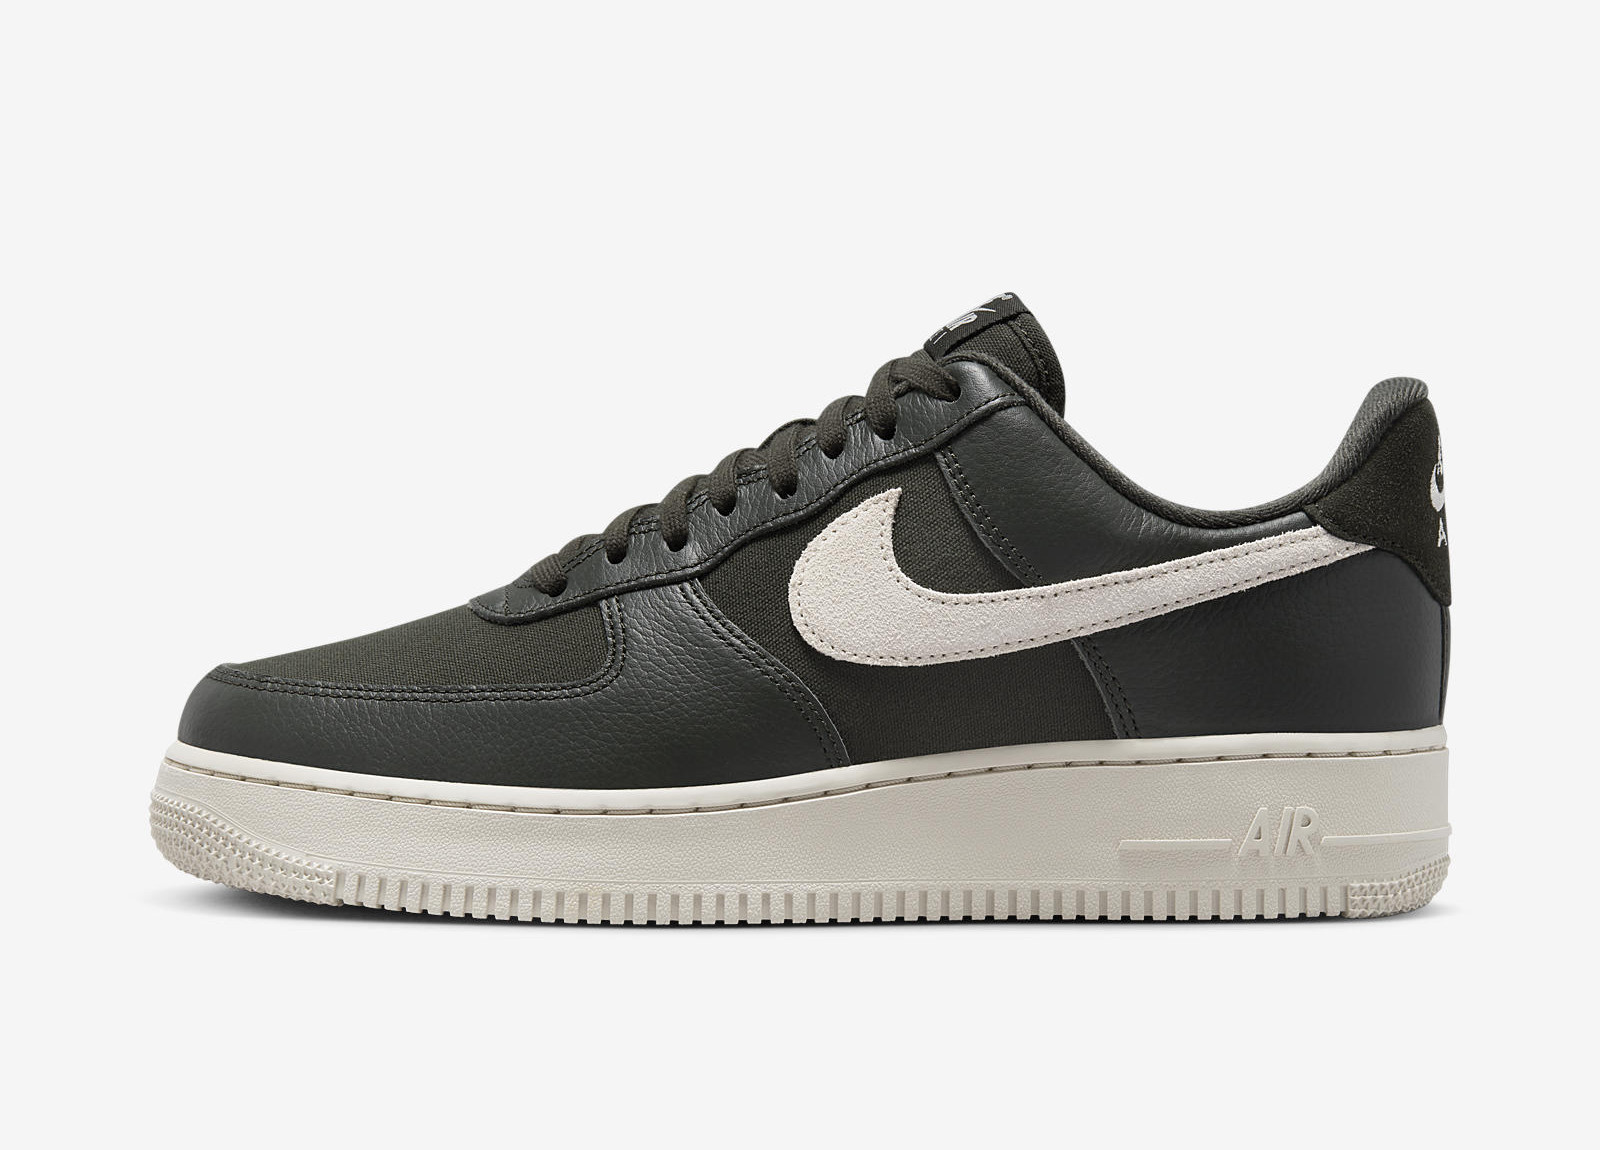 Nike Air Force 1 Low
« Sequoia »